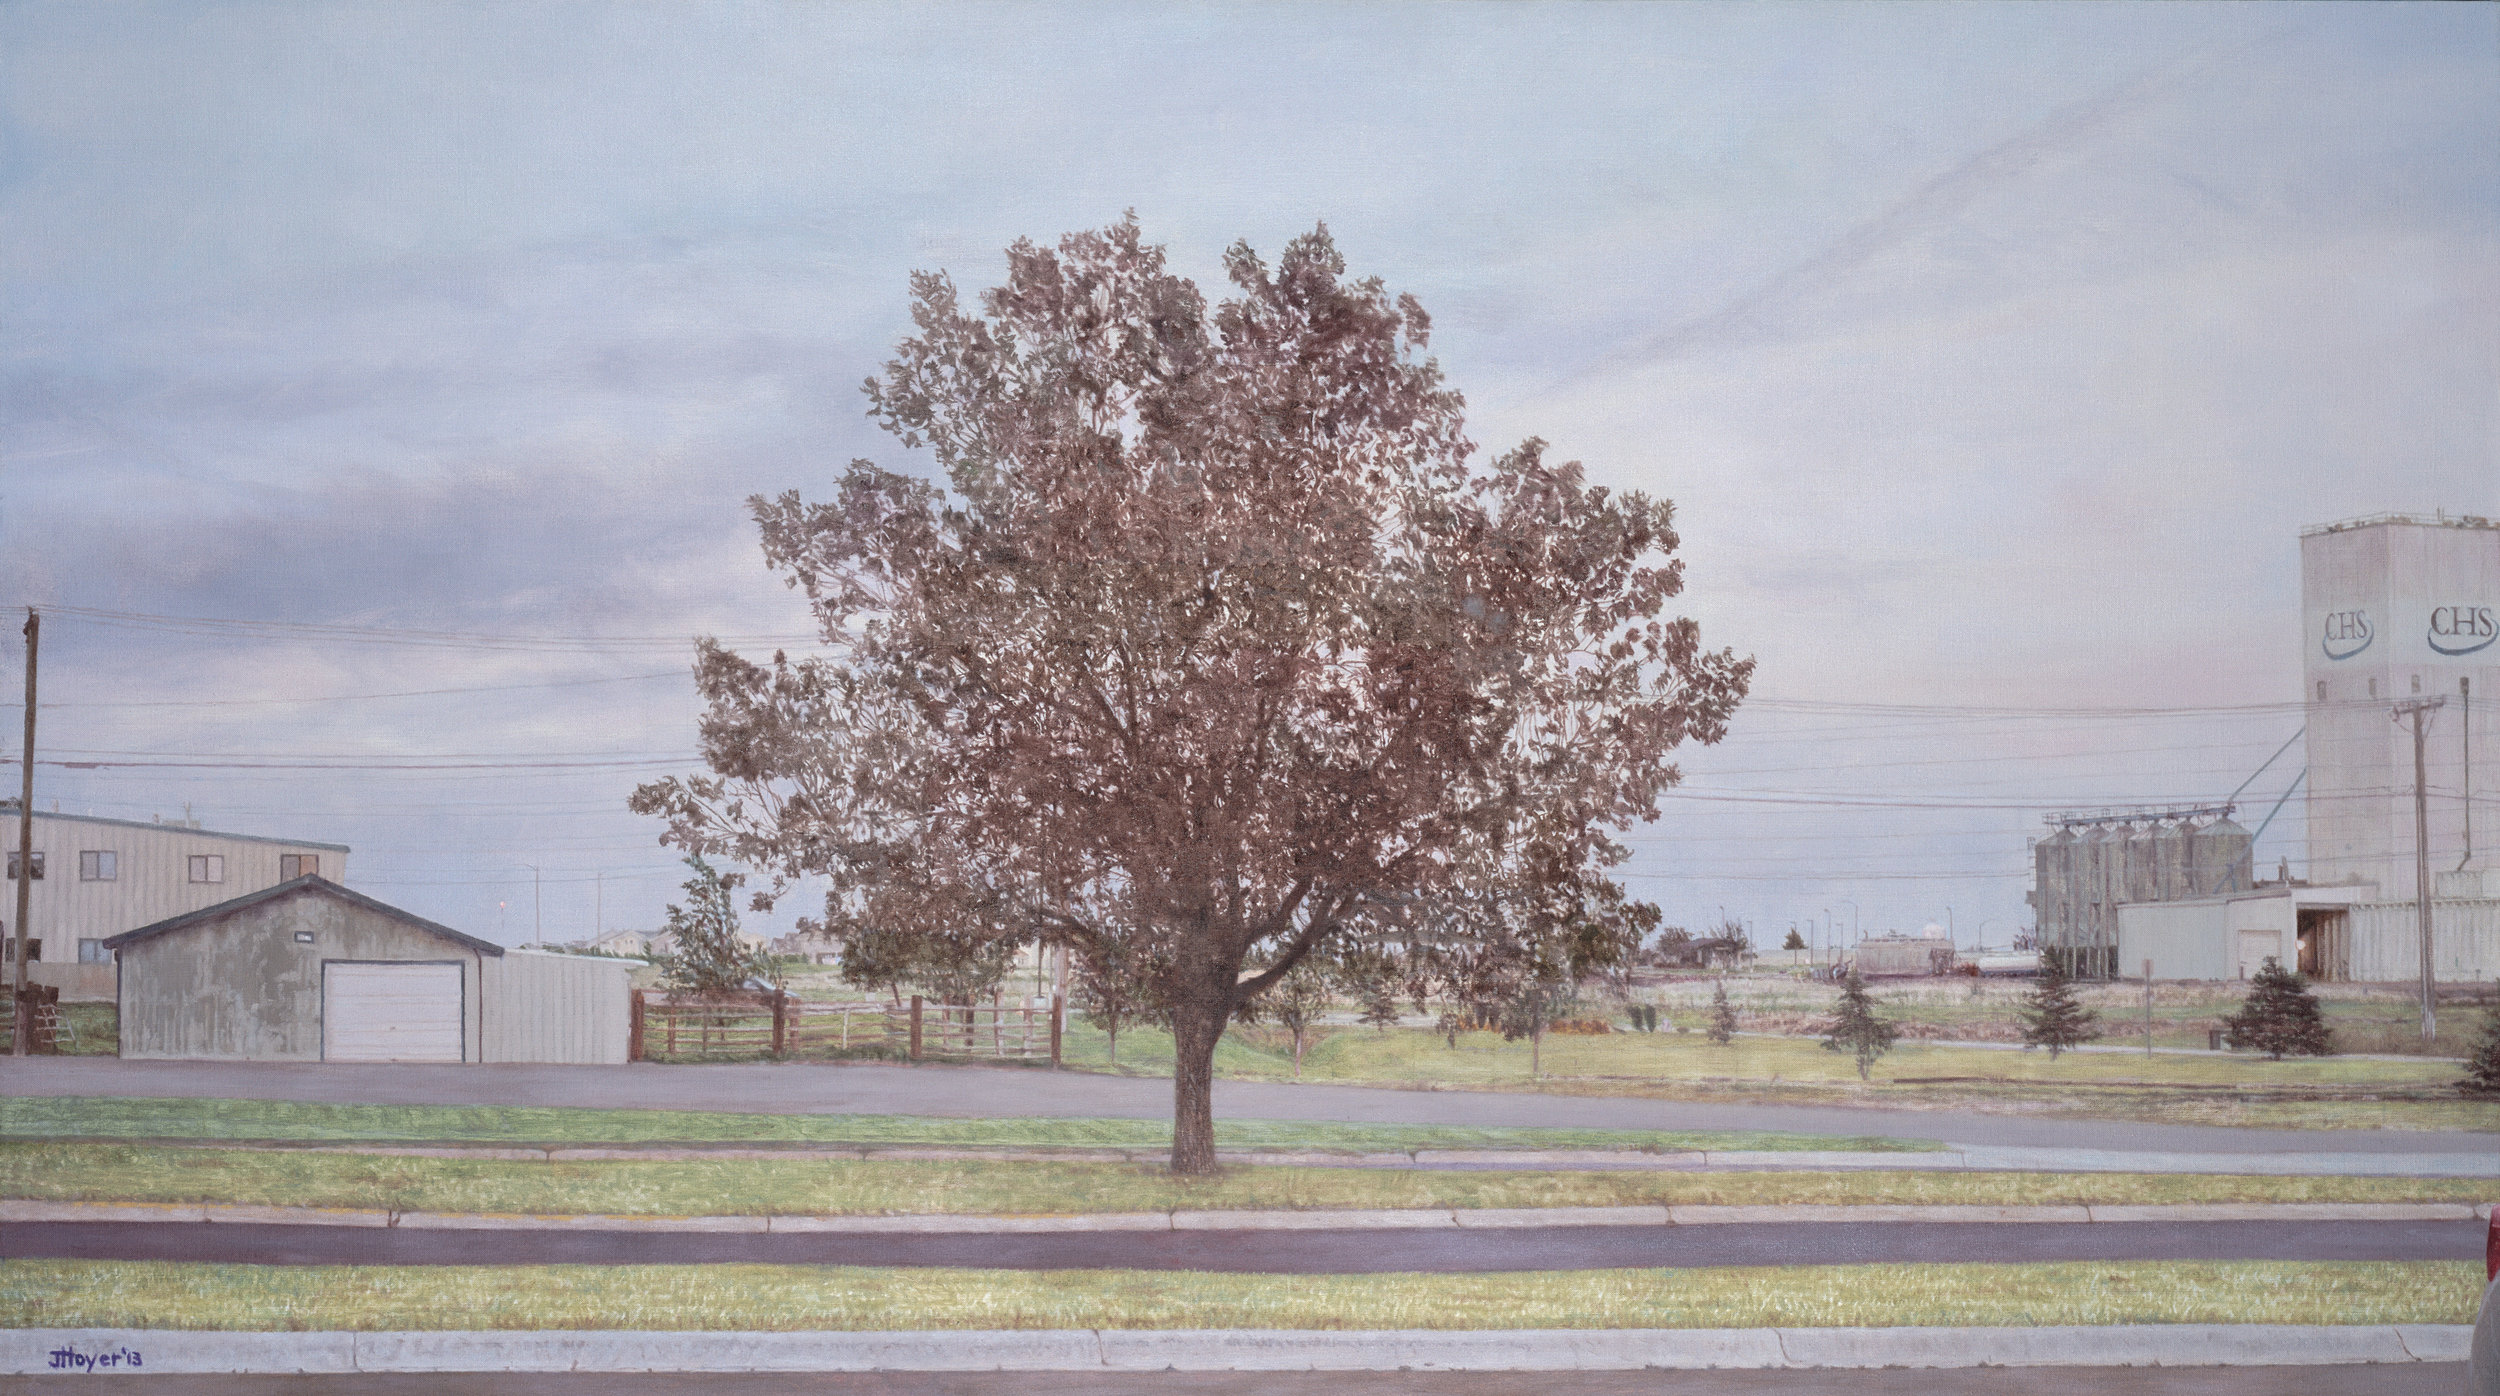   Montana Parking Lot Tree , 2013 Oil on linen 35 x 62 inches 